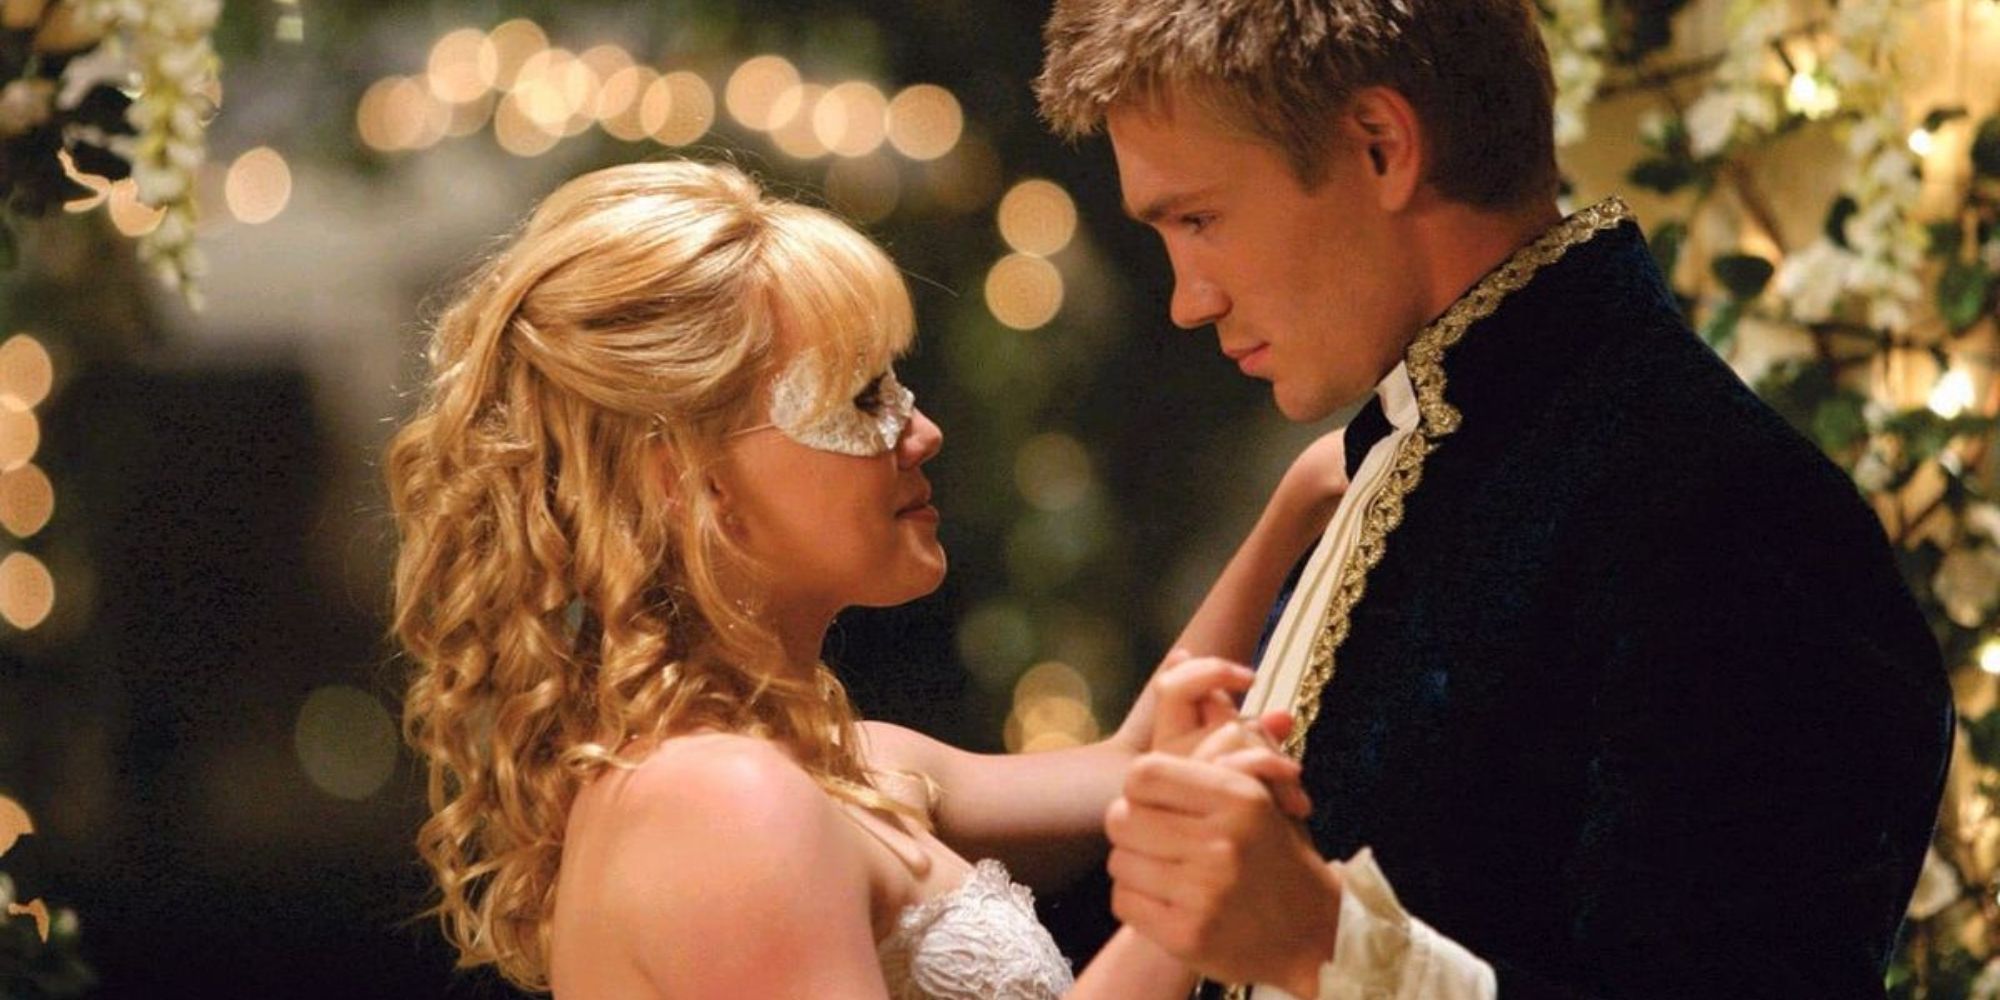 barbie movie-A Cinderella Story-Hilary Duff and Chad Michael Murray